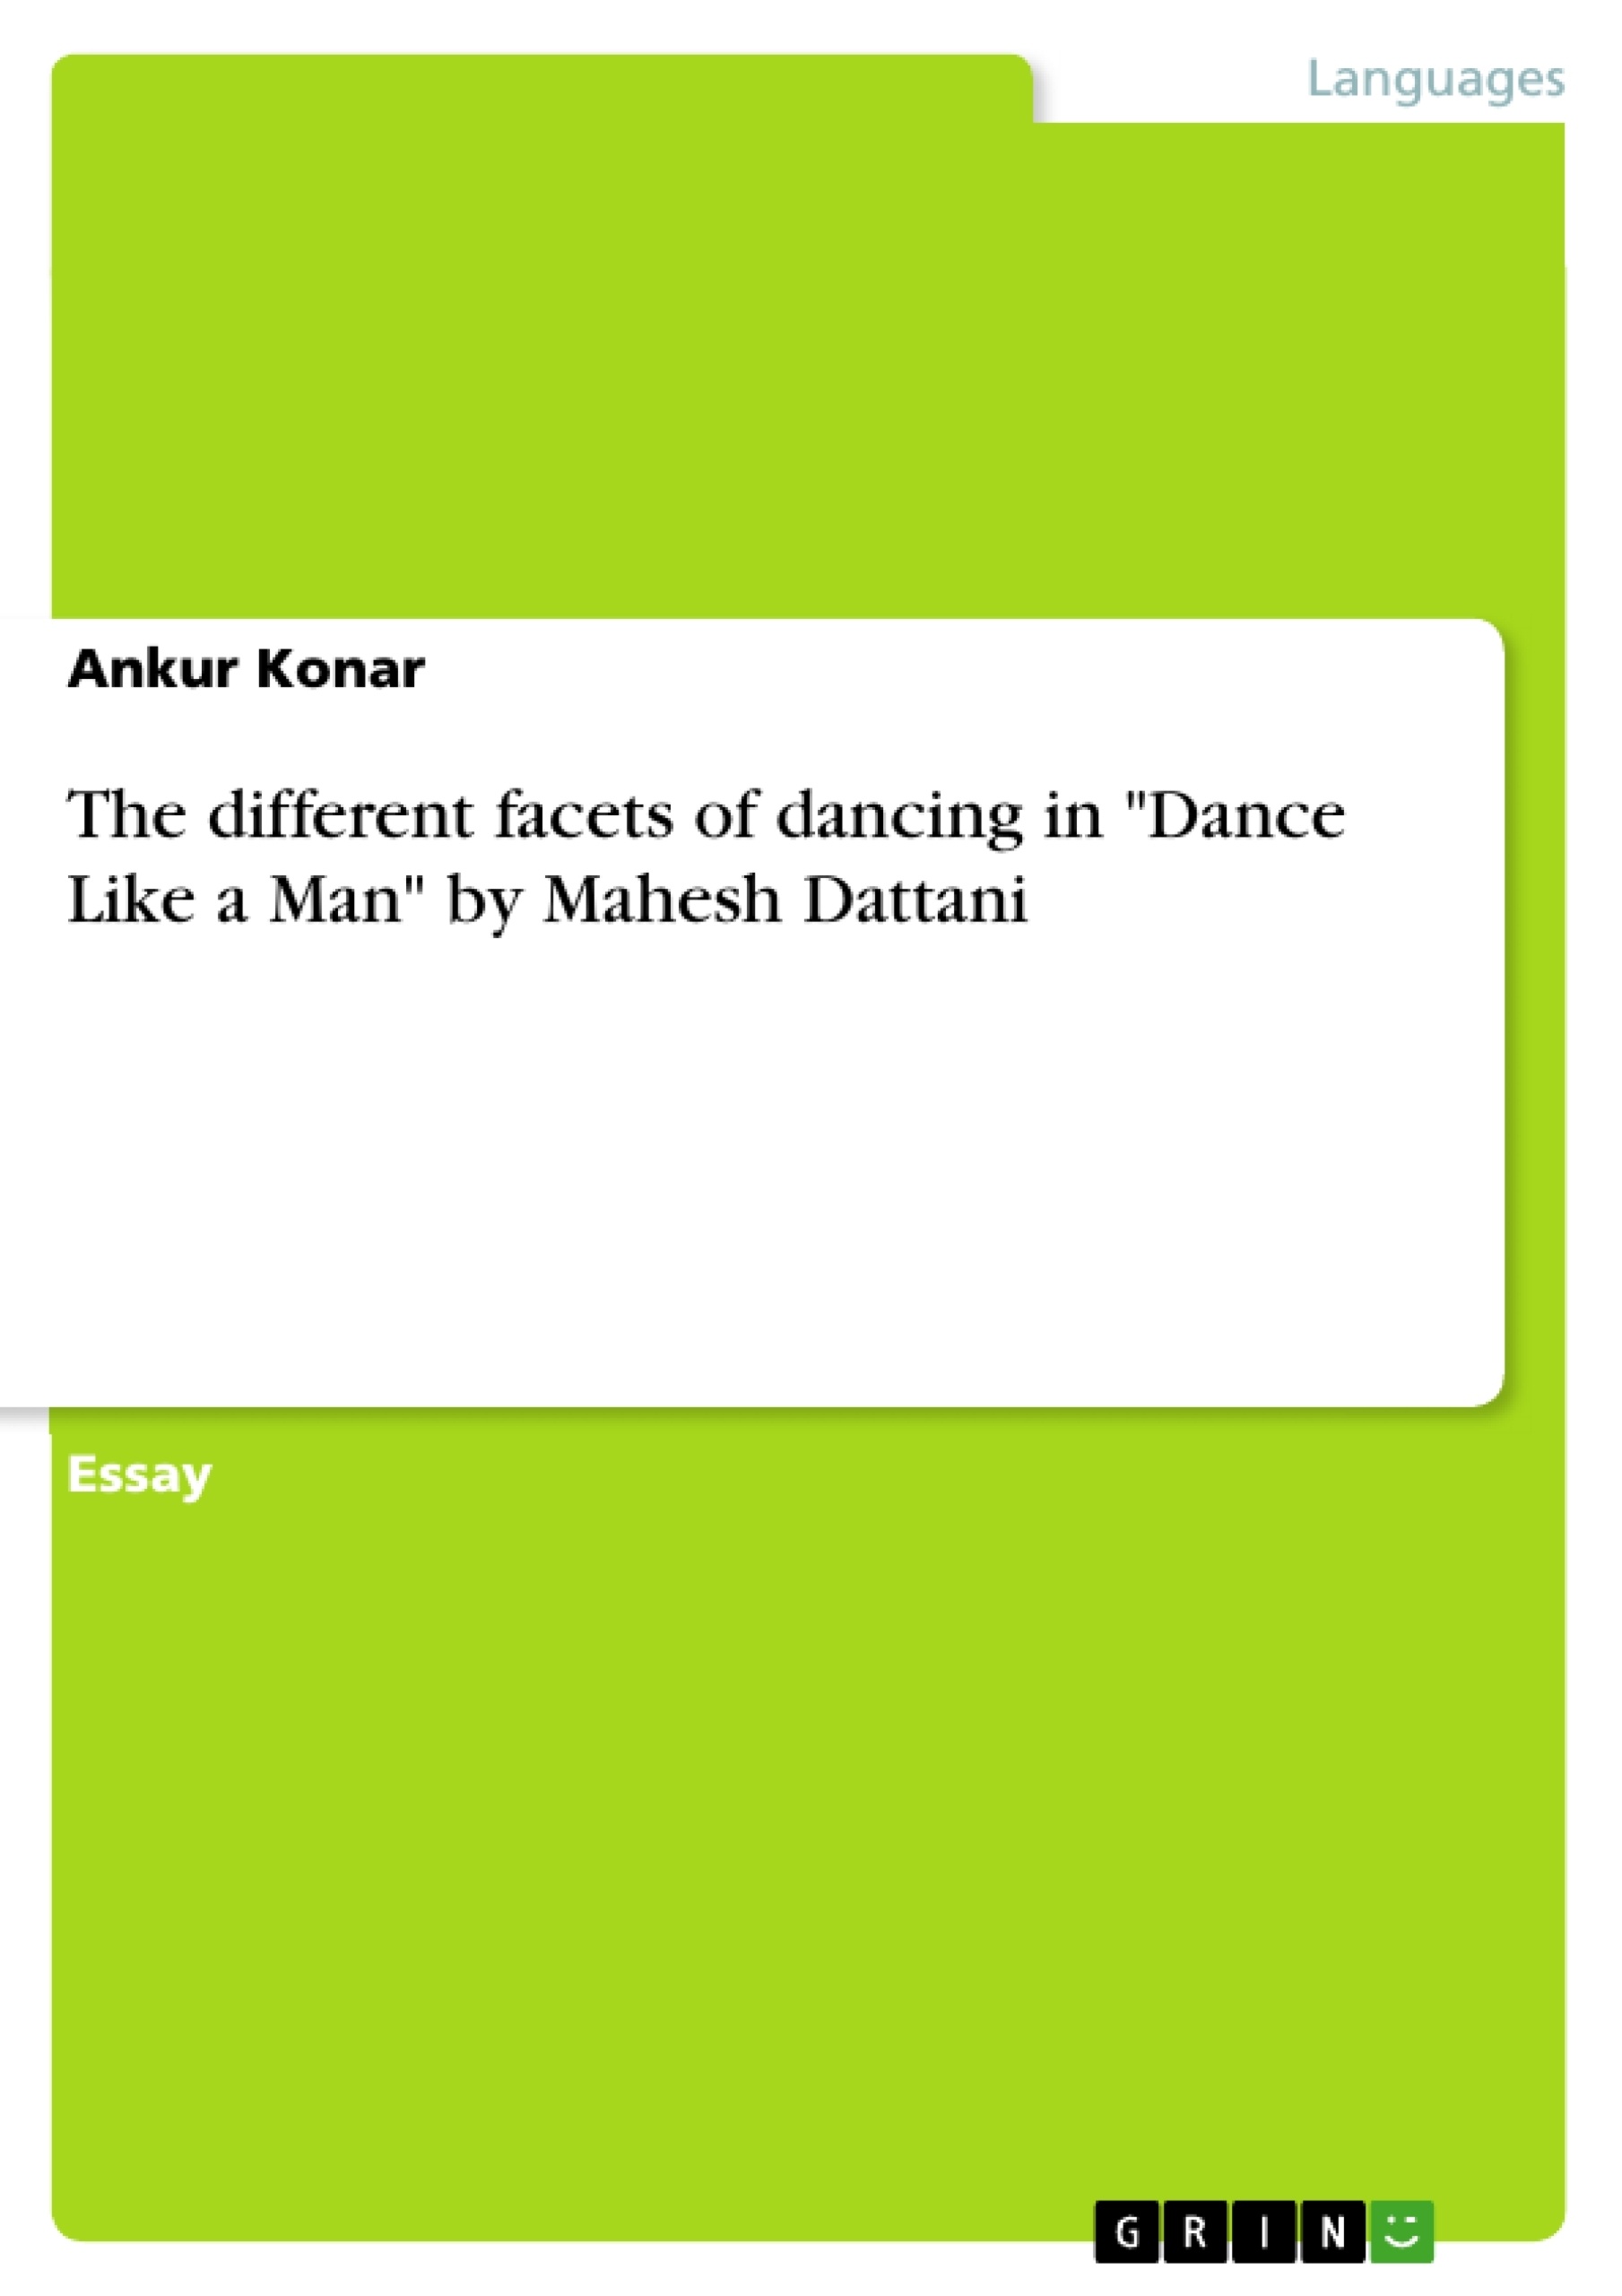 Titel: The different facets of dancing in "Dance Like a Man" by Mahesh Dattani